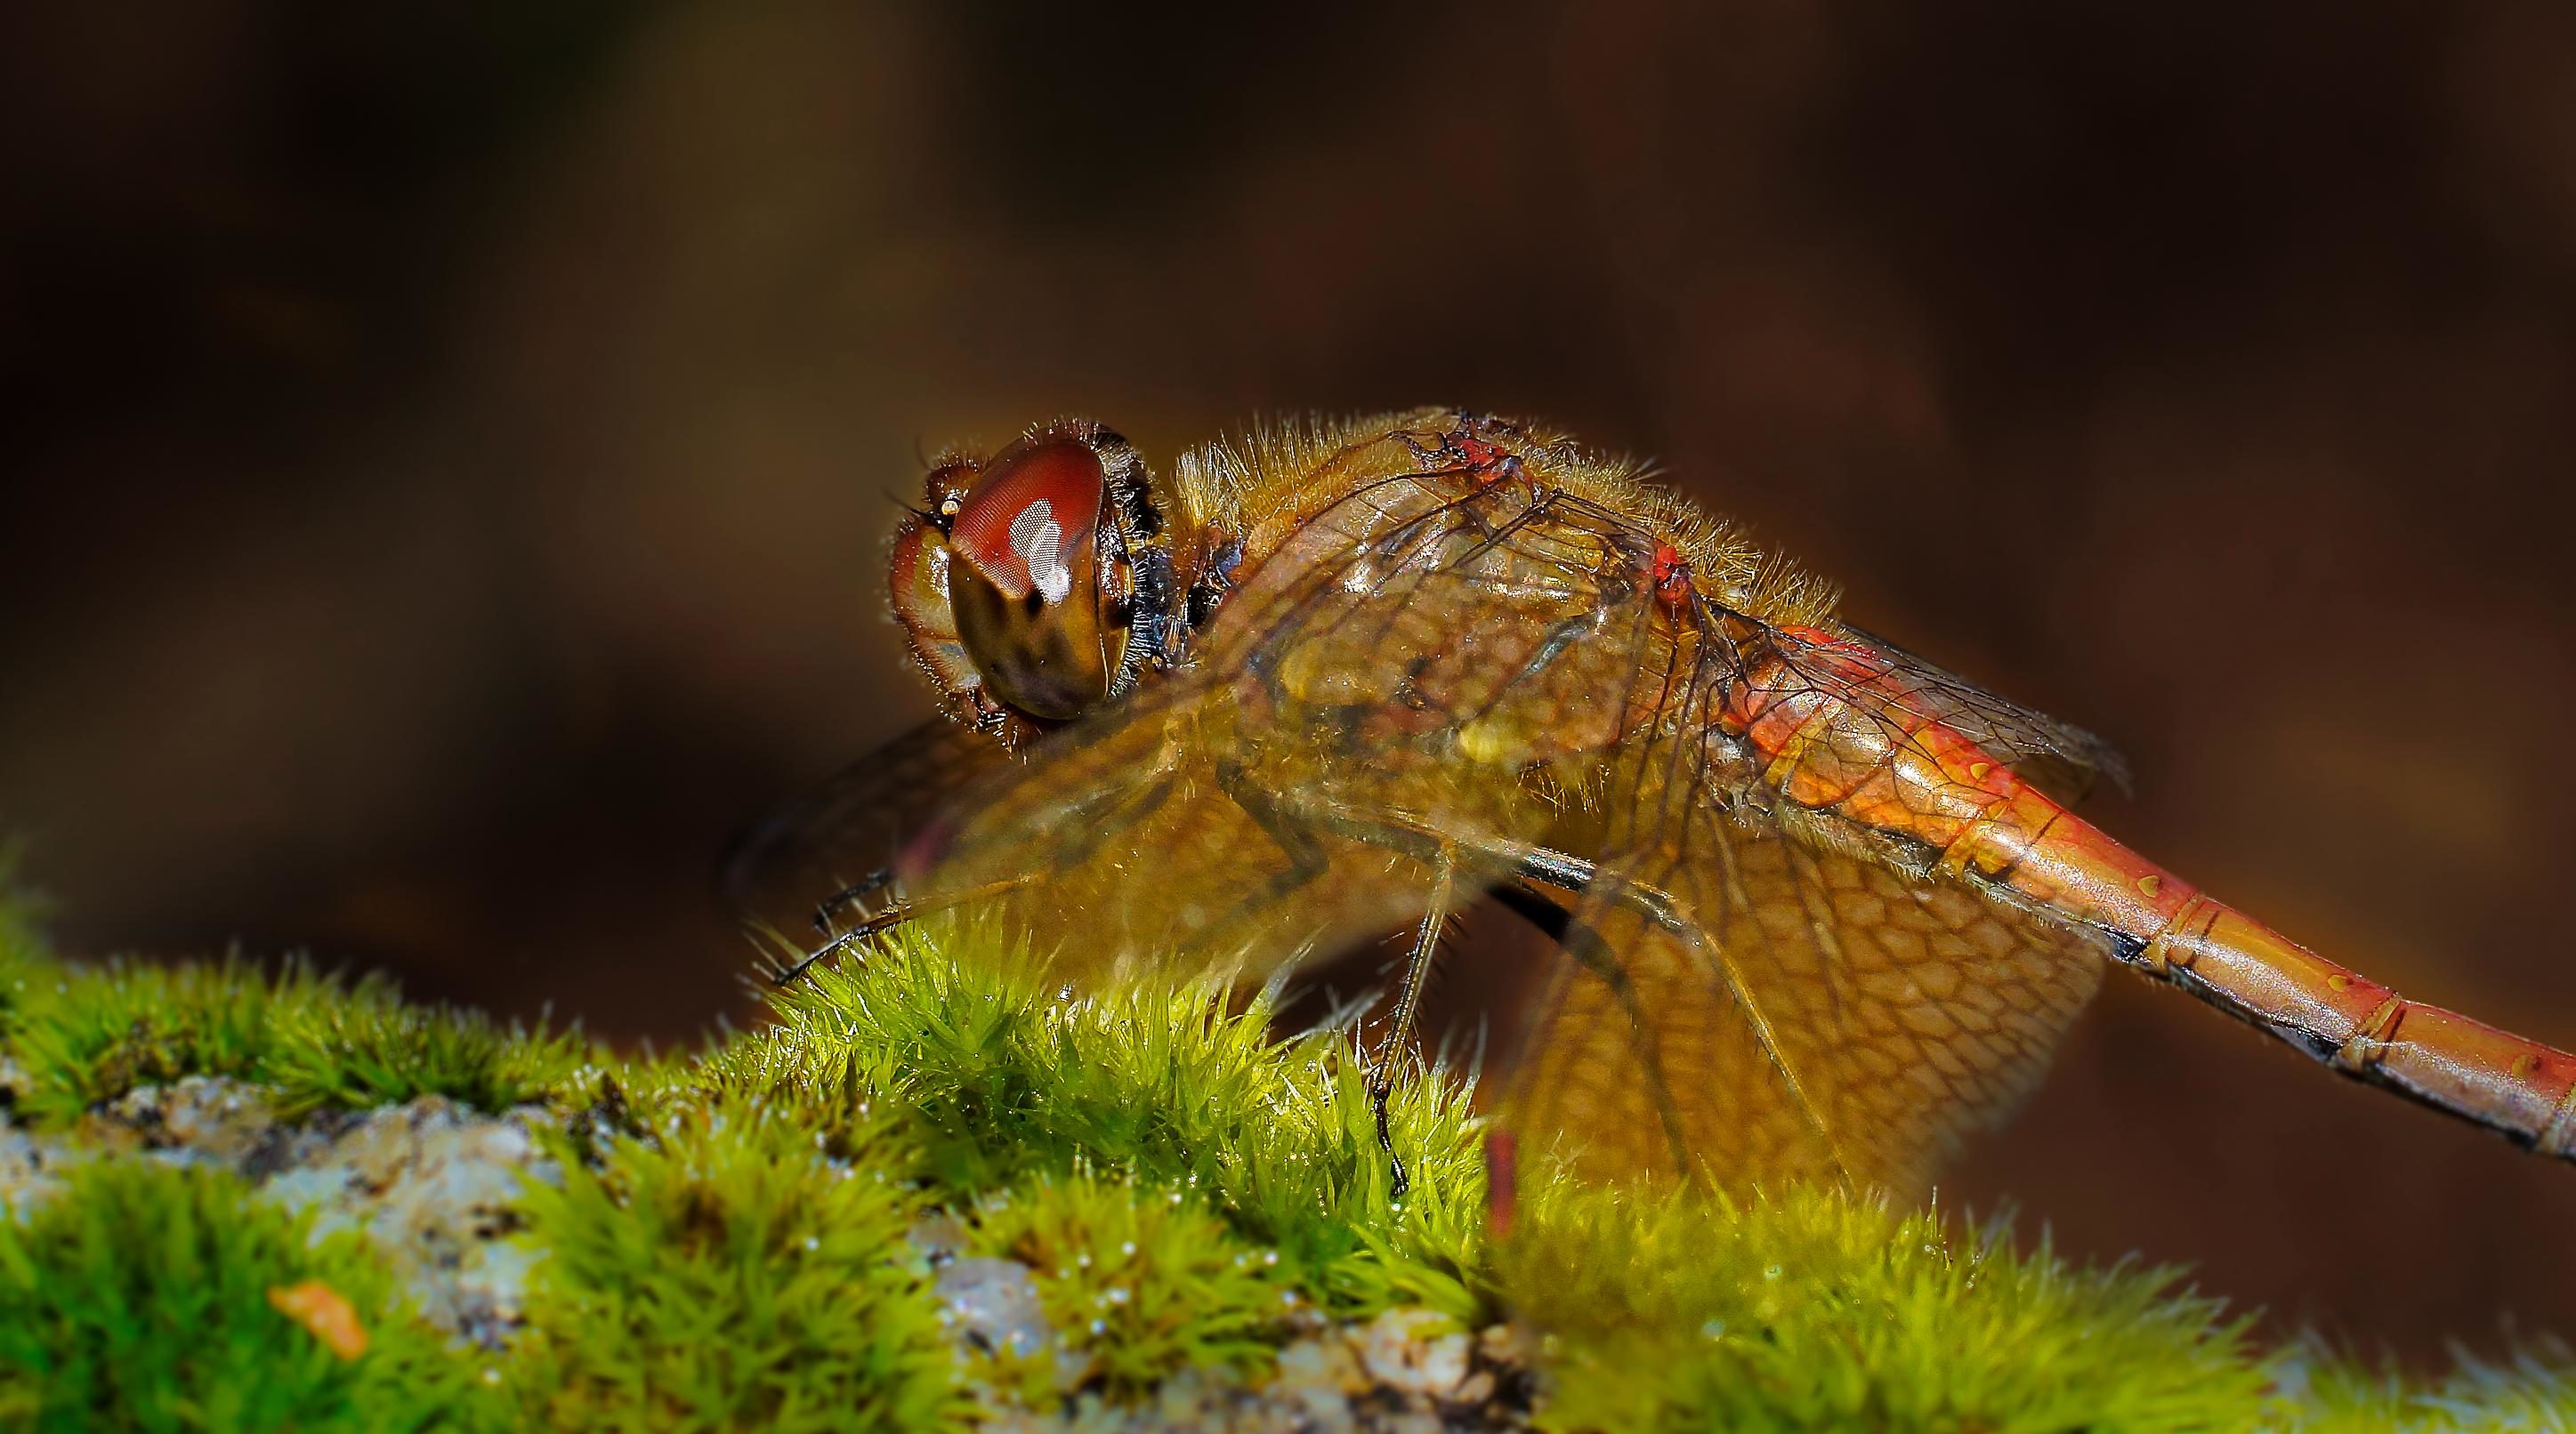 Free picture: dragonfly, macro, colorful, nature, insect, wildlife ...